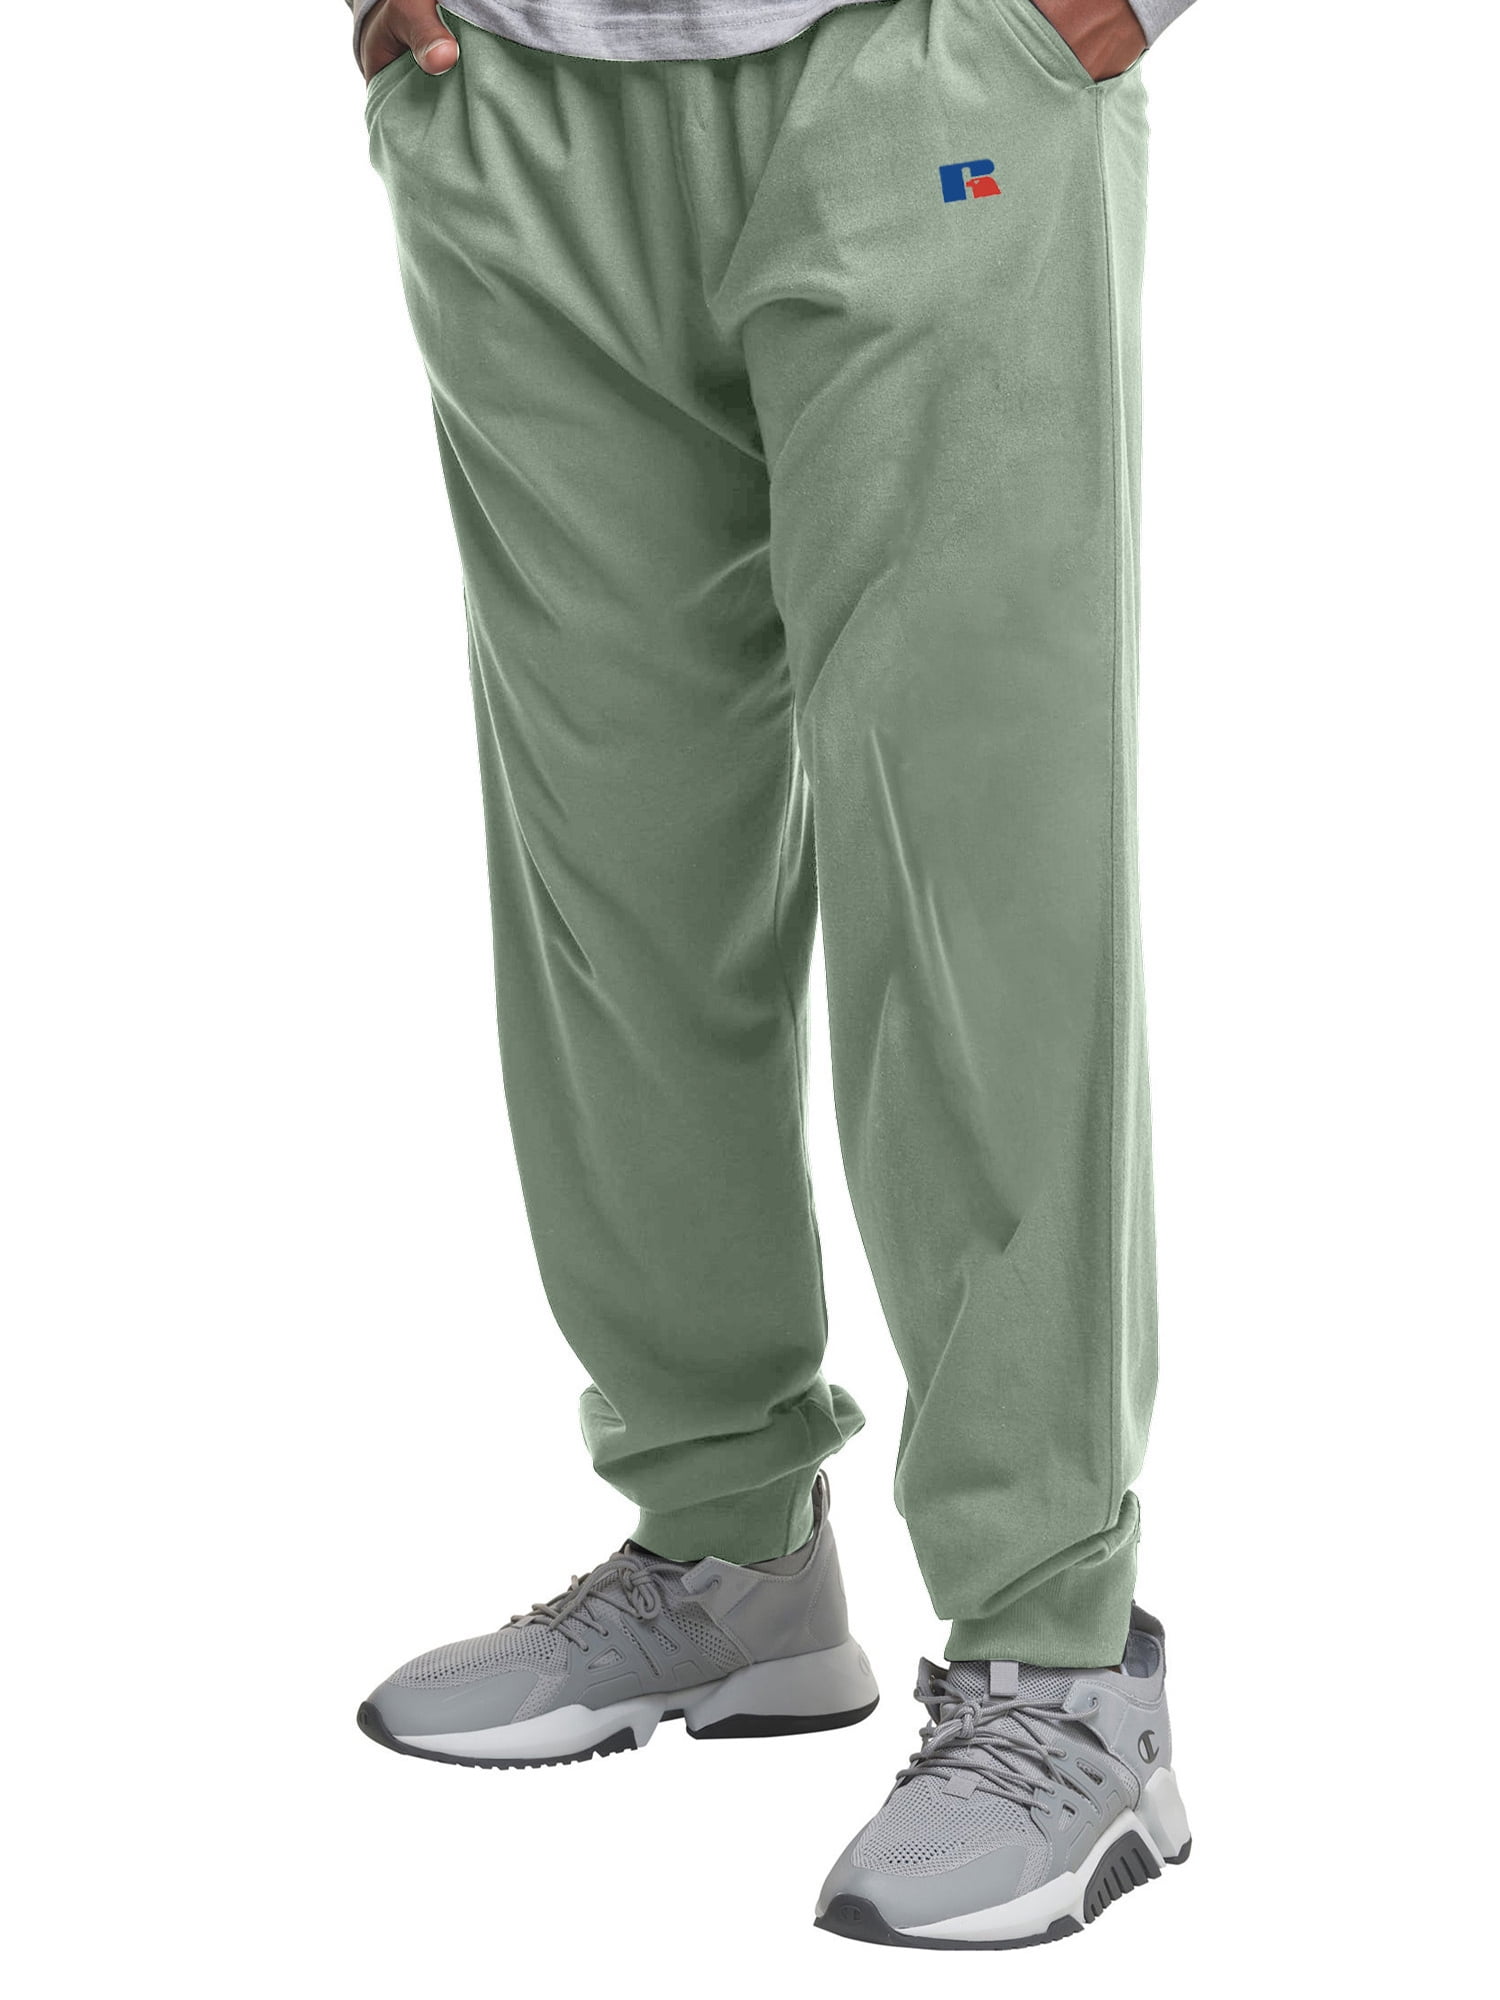 Russell Athletic Big & Tall Men's Cotton French Terry Sweatpants 